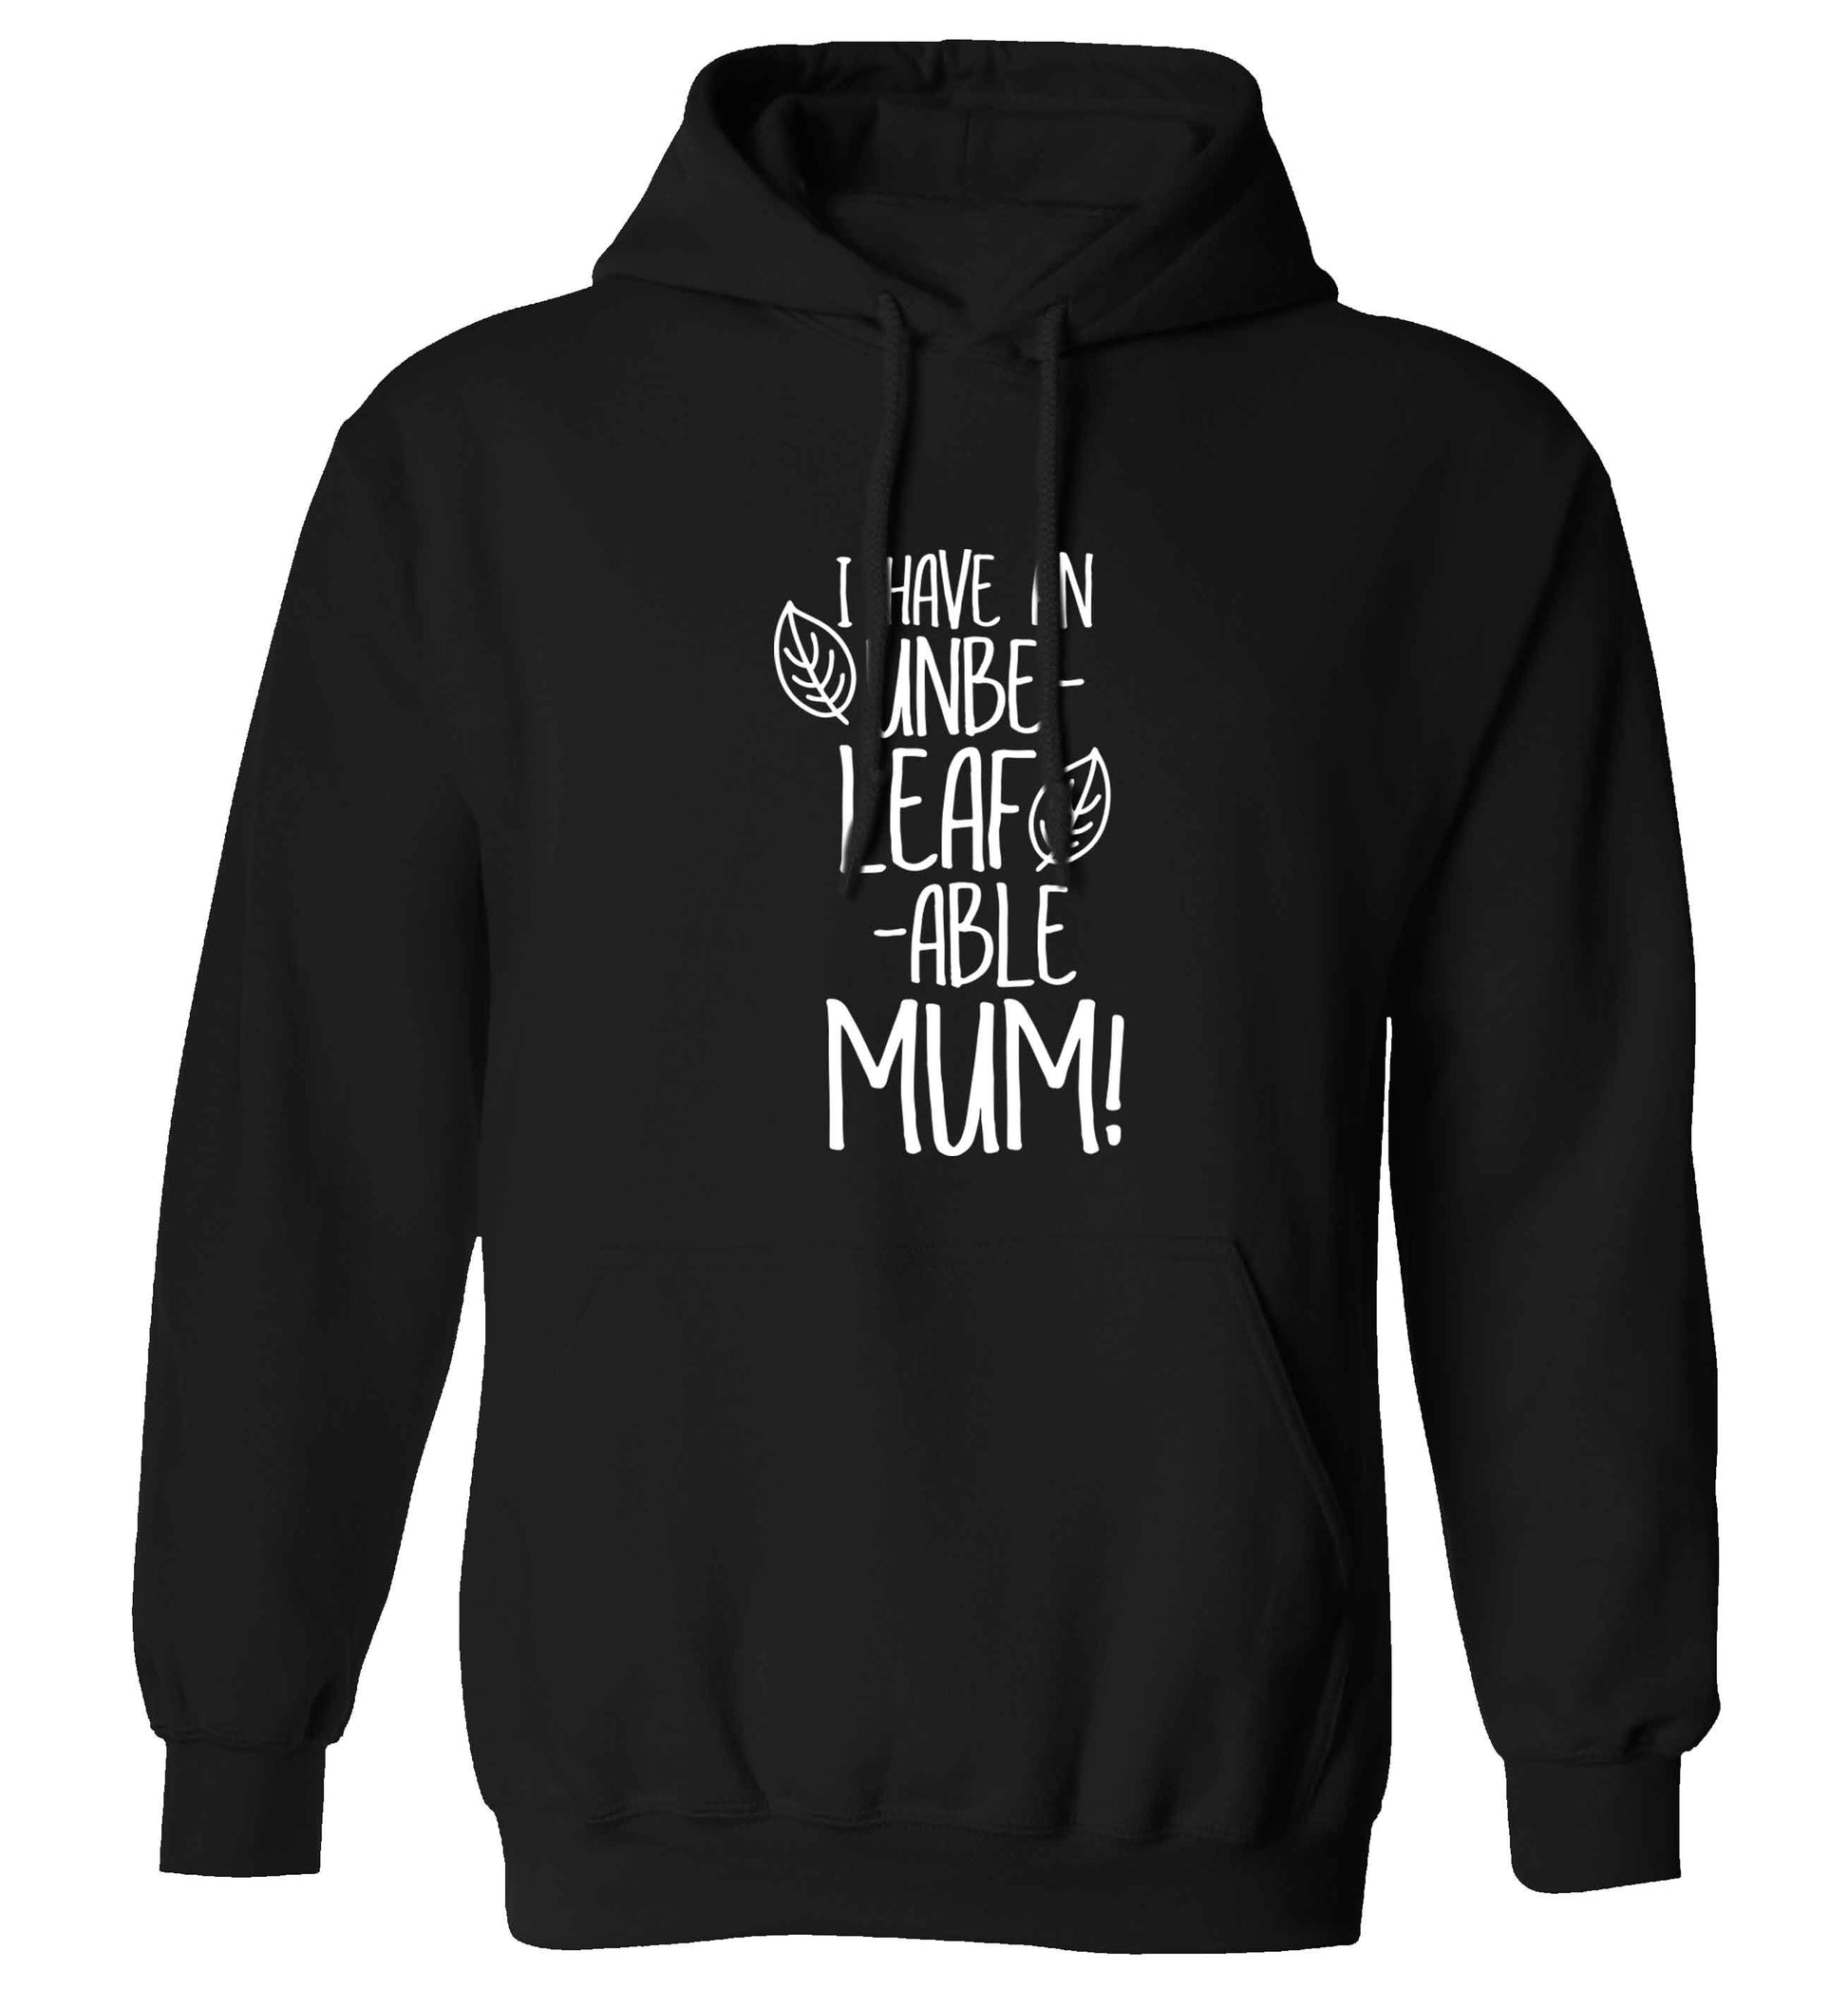 I have an unbeleafable mum! adults unisex black hoodie 2XL